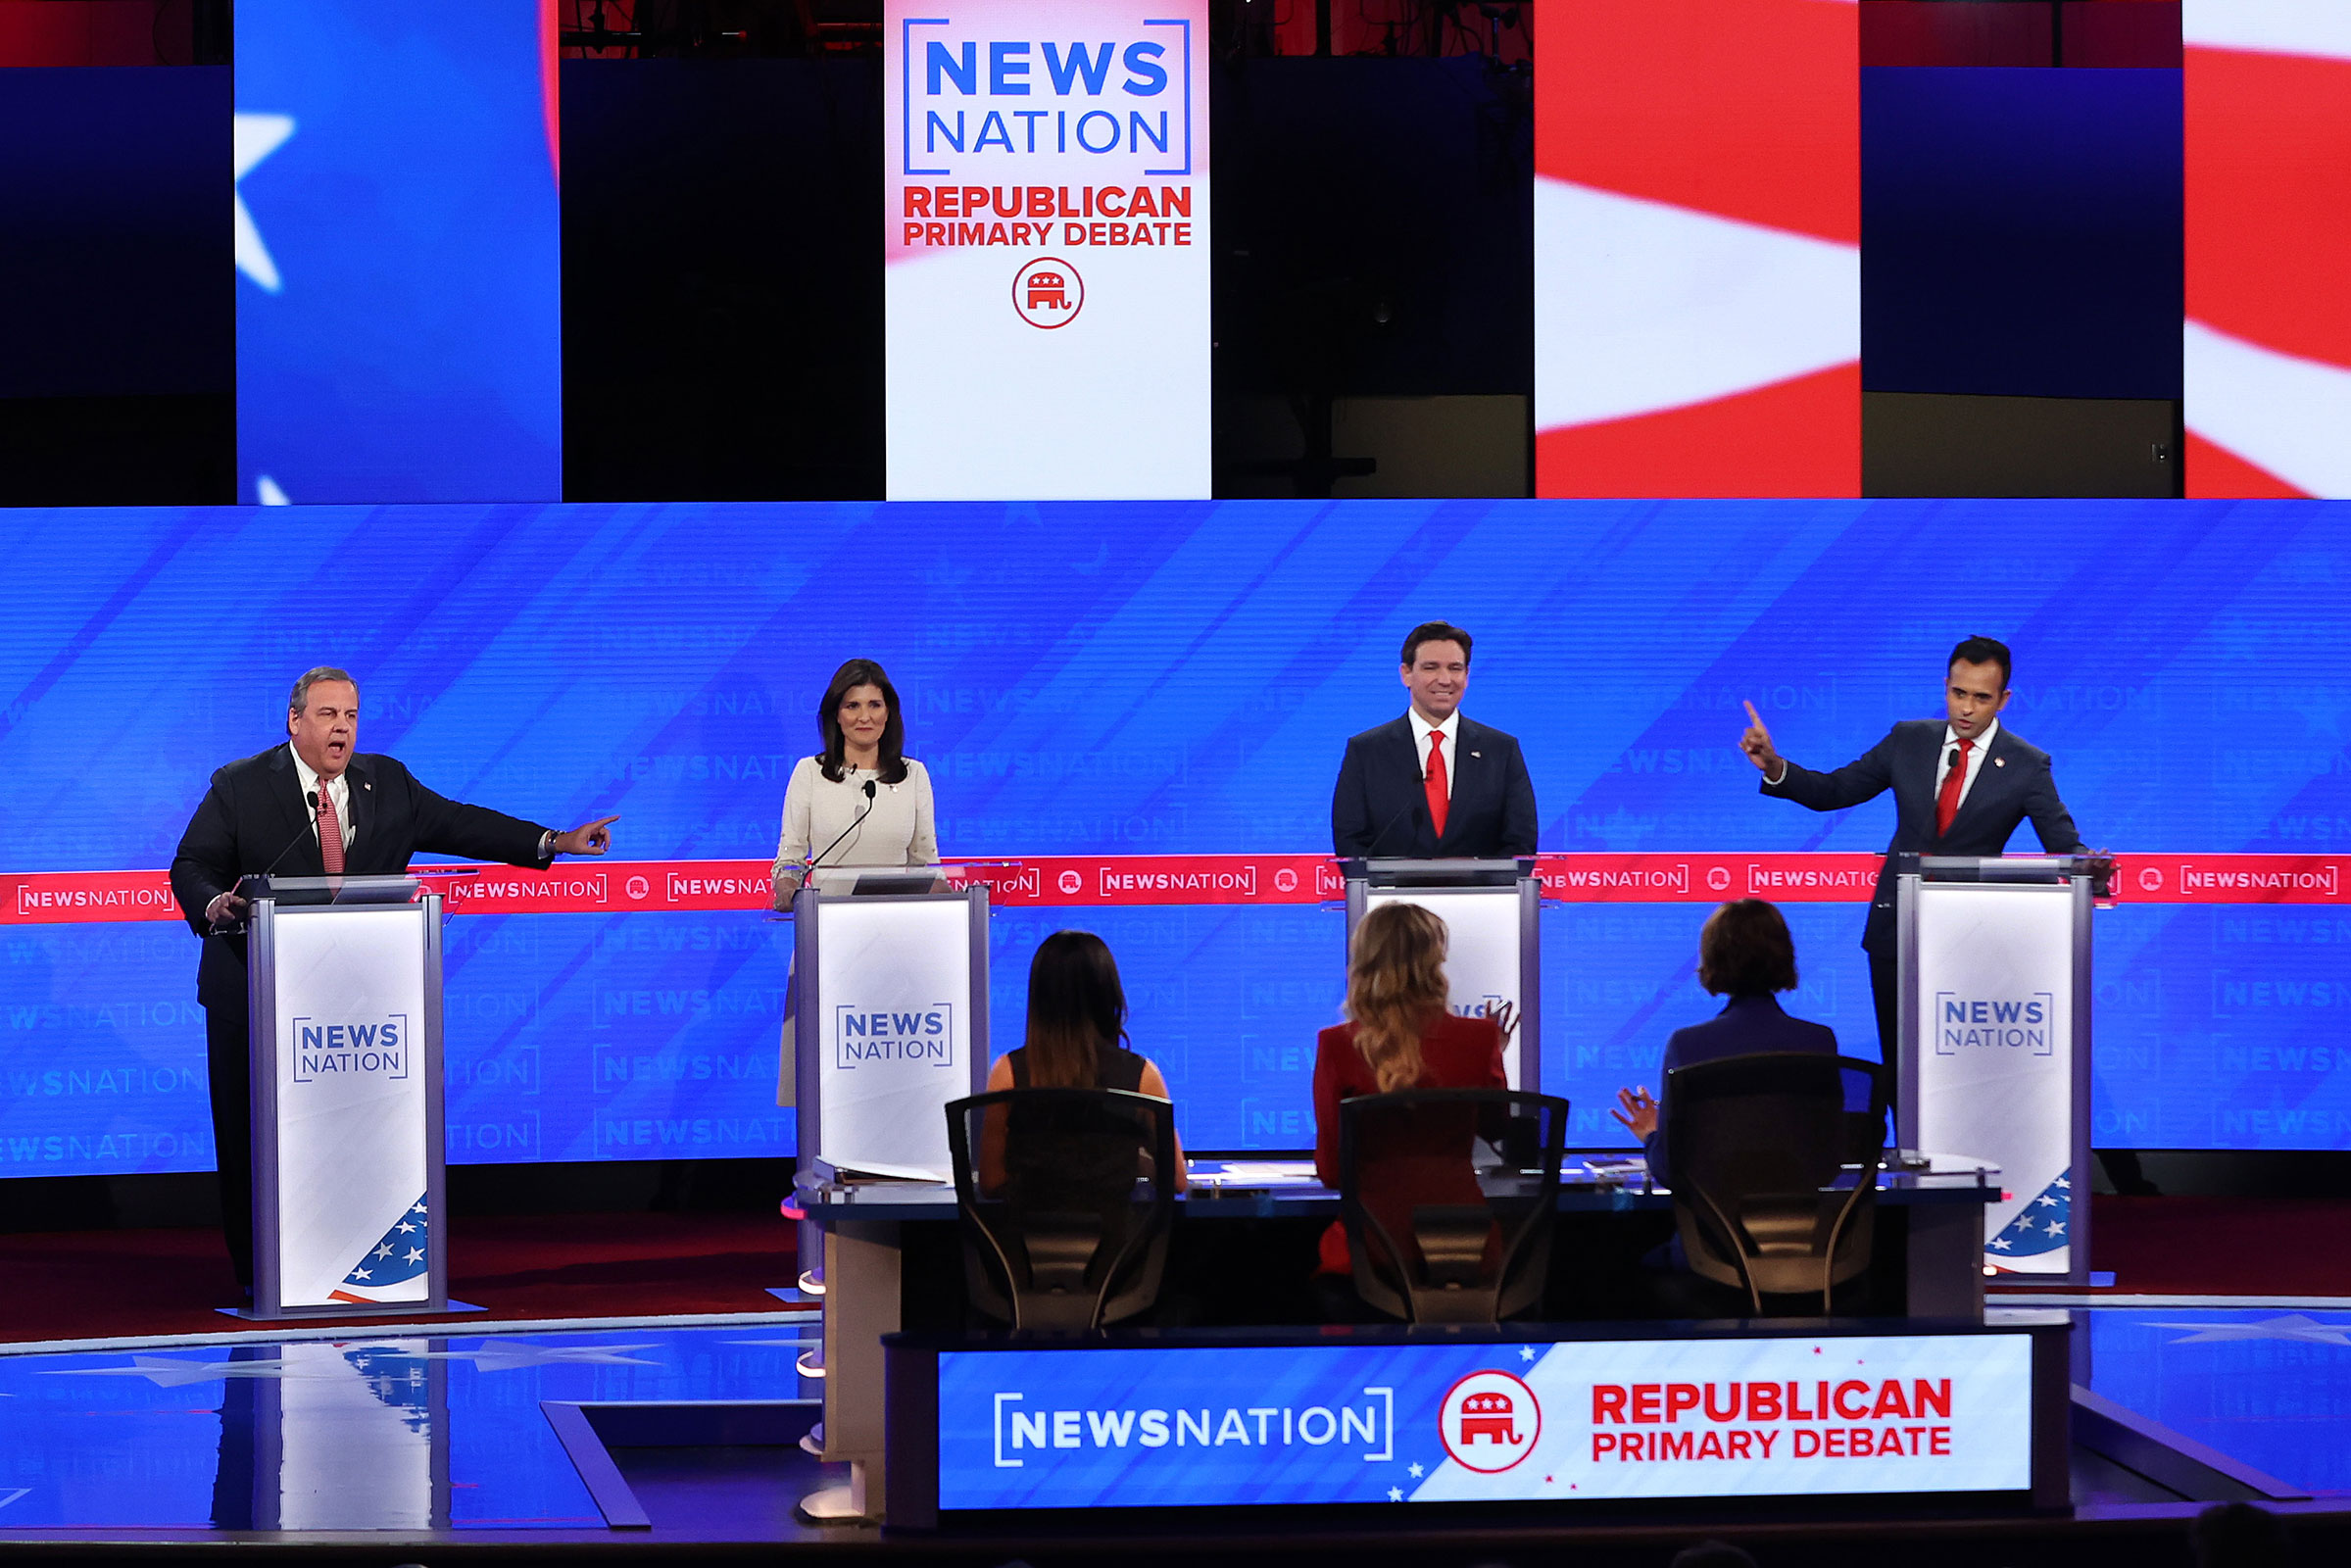 Republican presidential candidates former New Jersey Gov. Chris Christie, former UN Ambassador Nikki Haley, Florida Gov. Ron DeSantis and Vivek Ramaswamy participate in the NewsNation Republican Presidential Primary Debate at the University of Alabama Moody Music Hall on December 6, in Tuscaloosa.